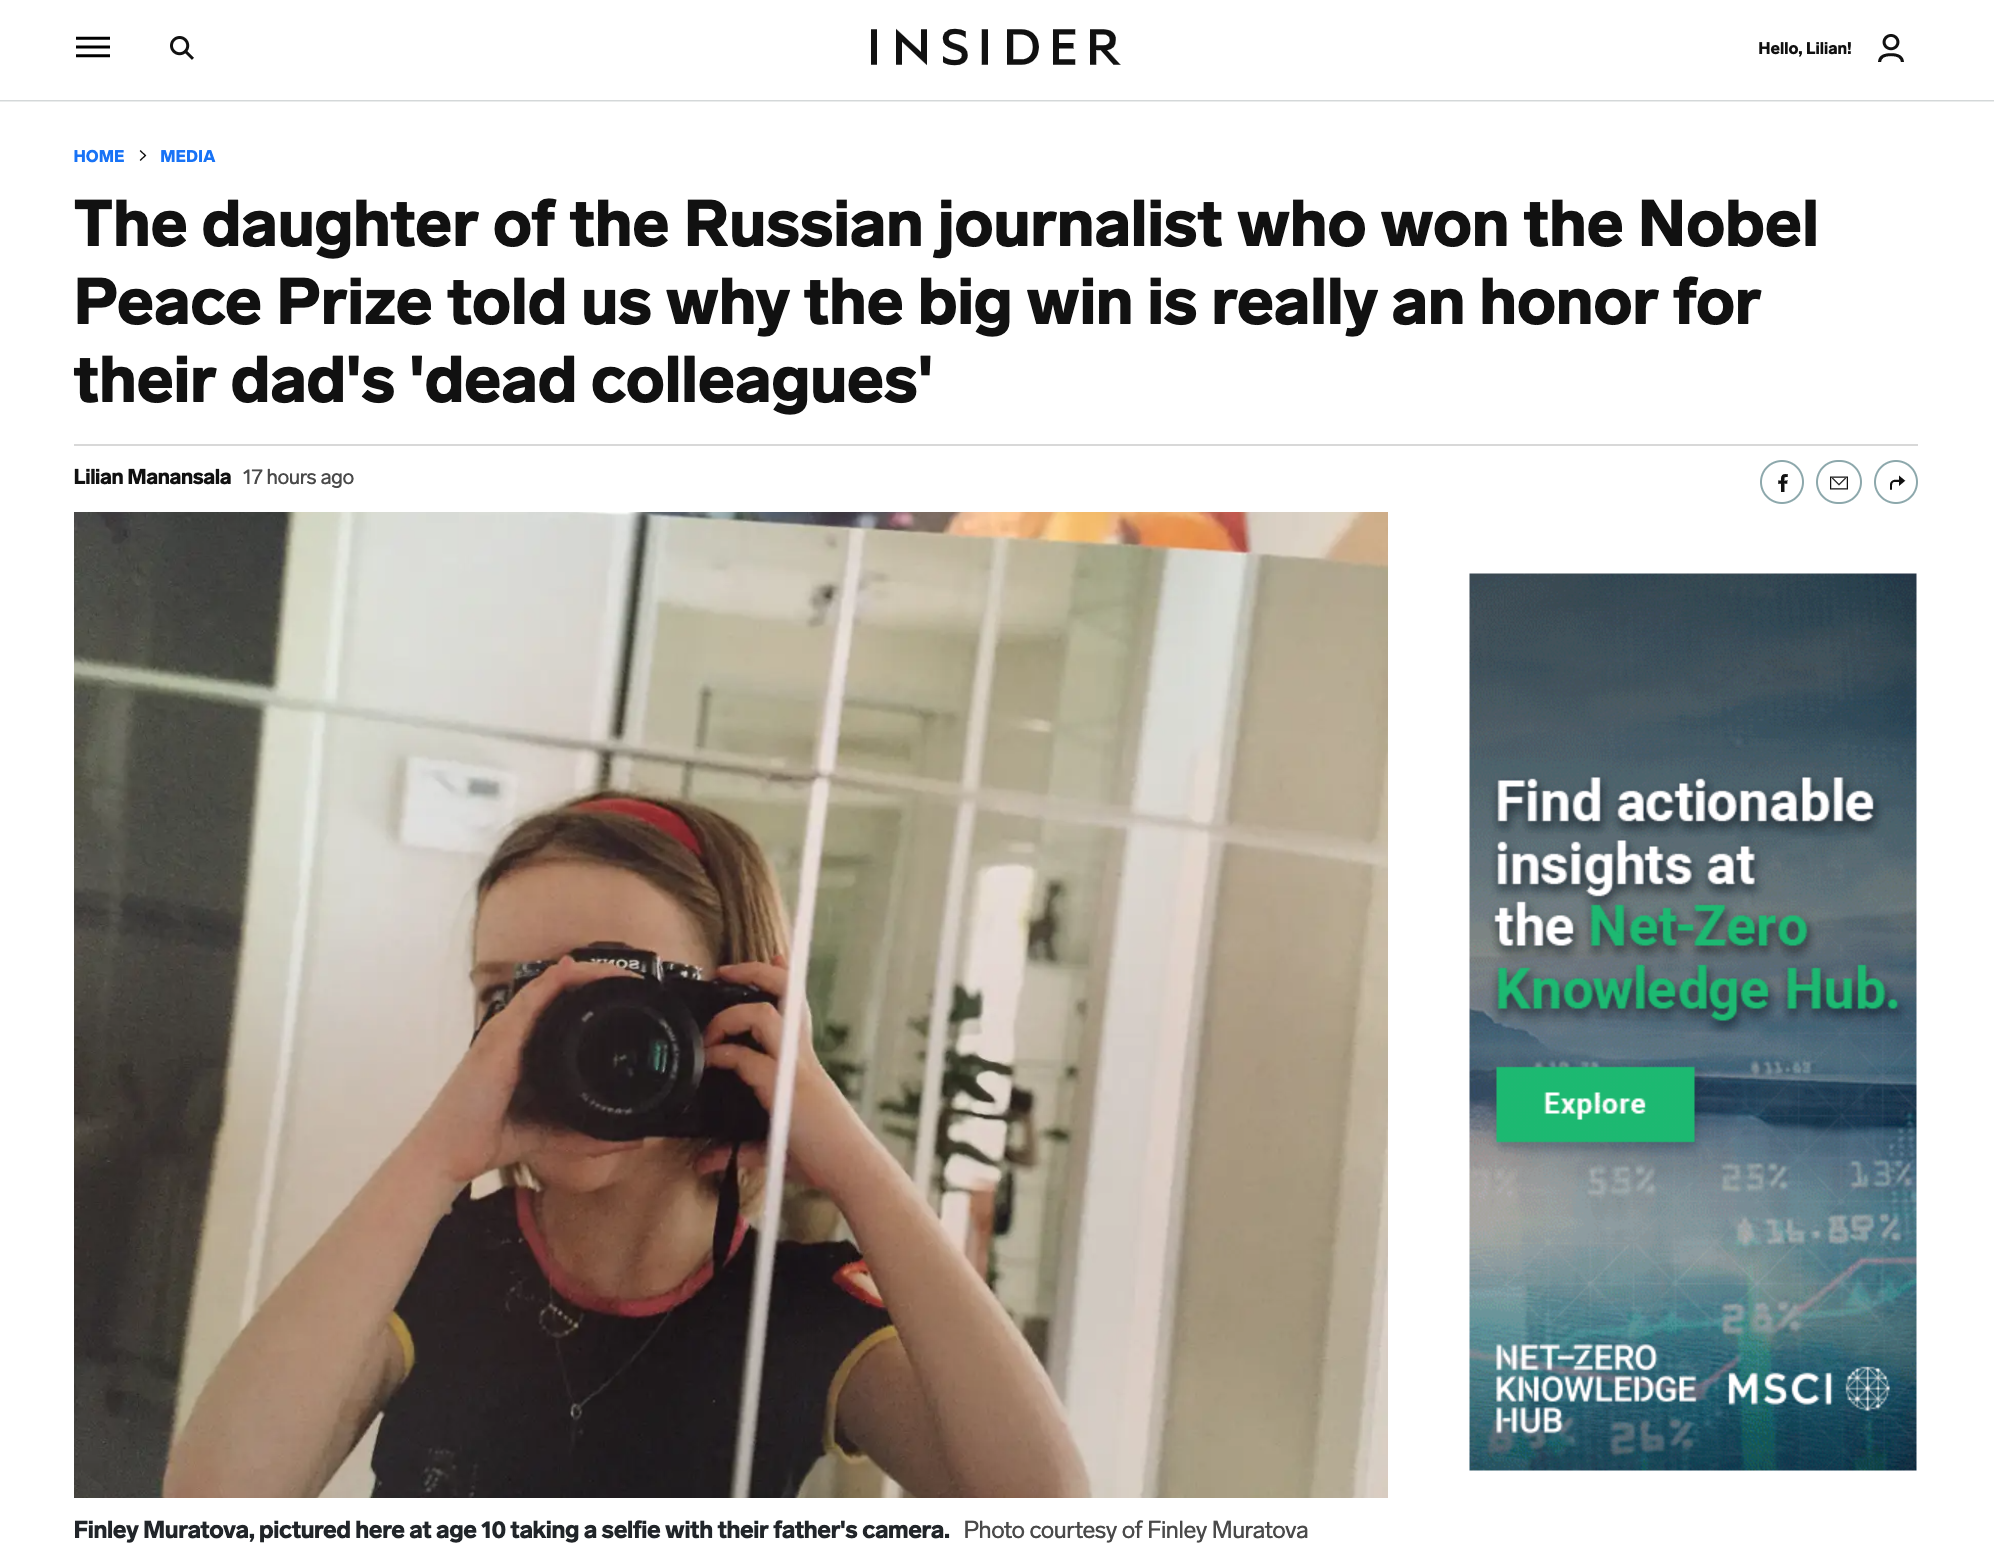 Insider: The daughter of the Russian journalist who won the Nobel Peace Prize told us why the big win is really an honor for their dad's 'dead colleagues'